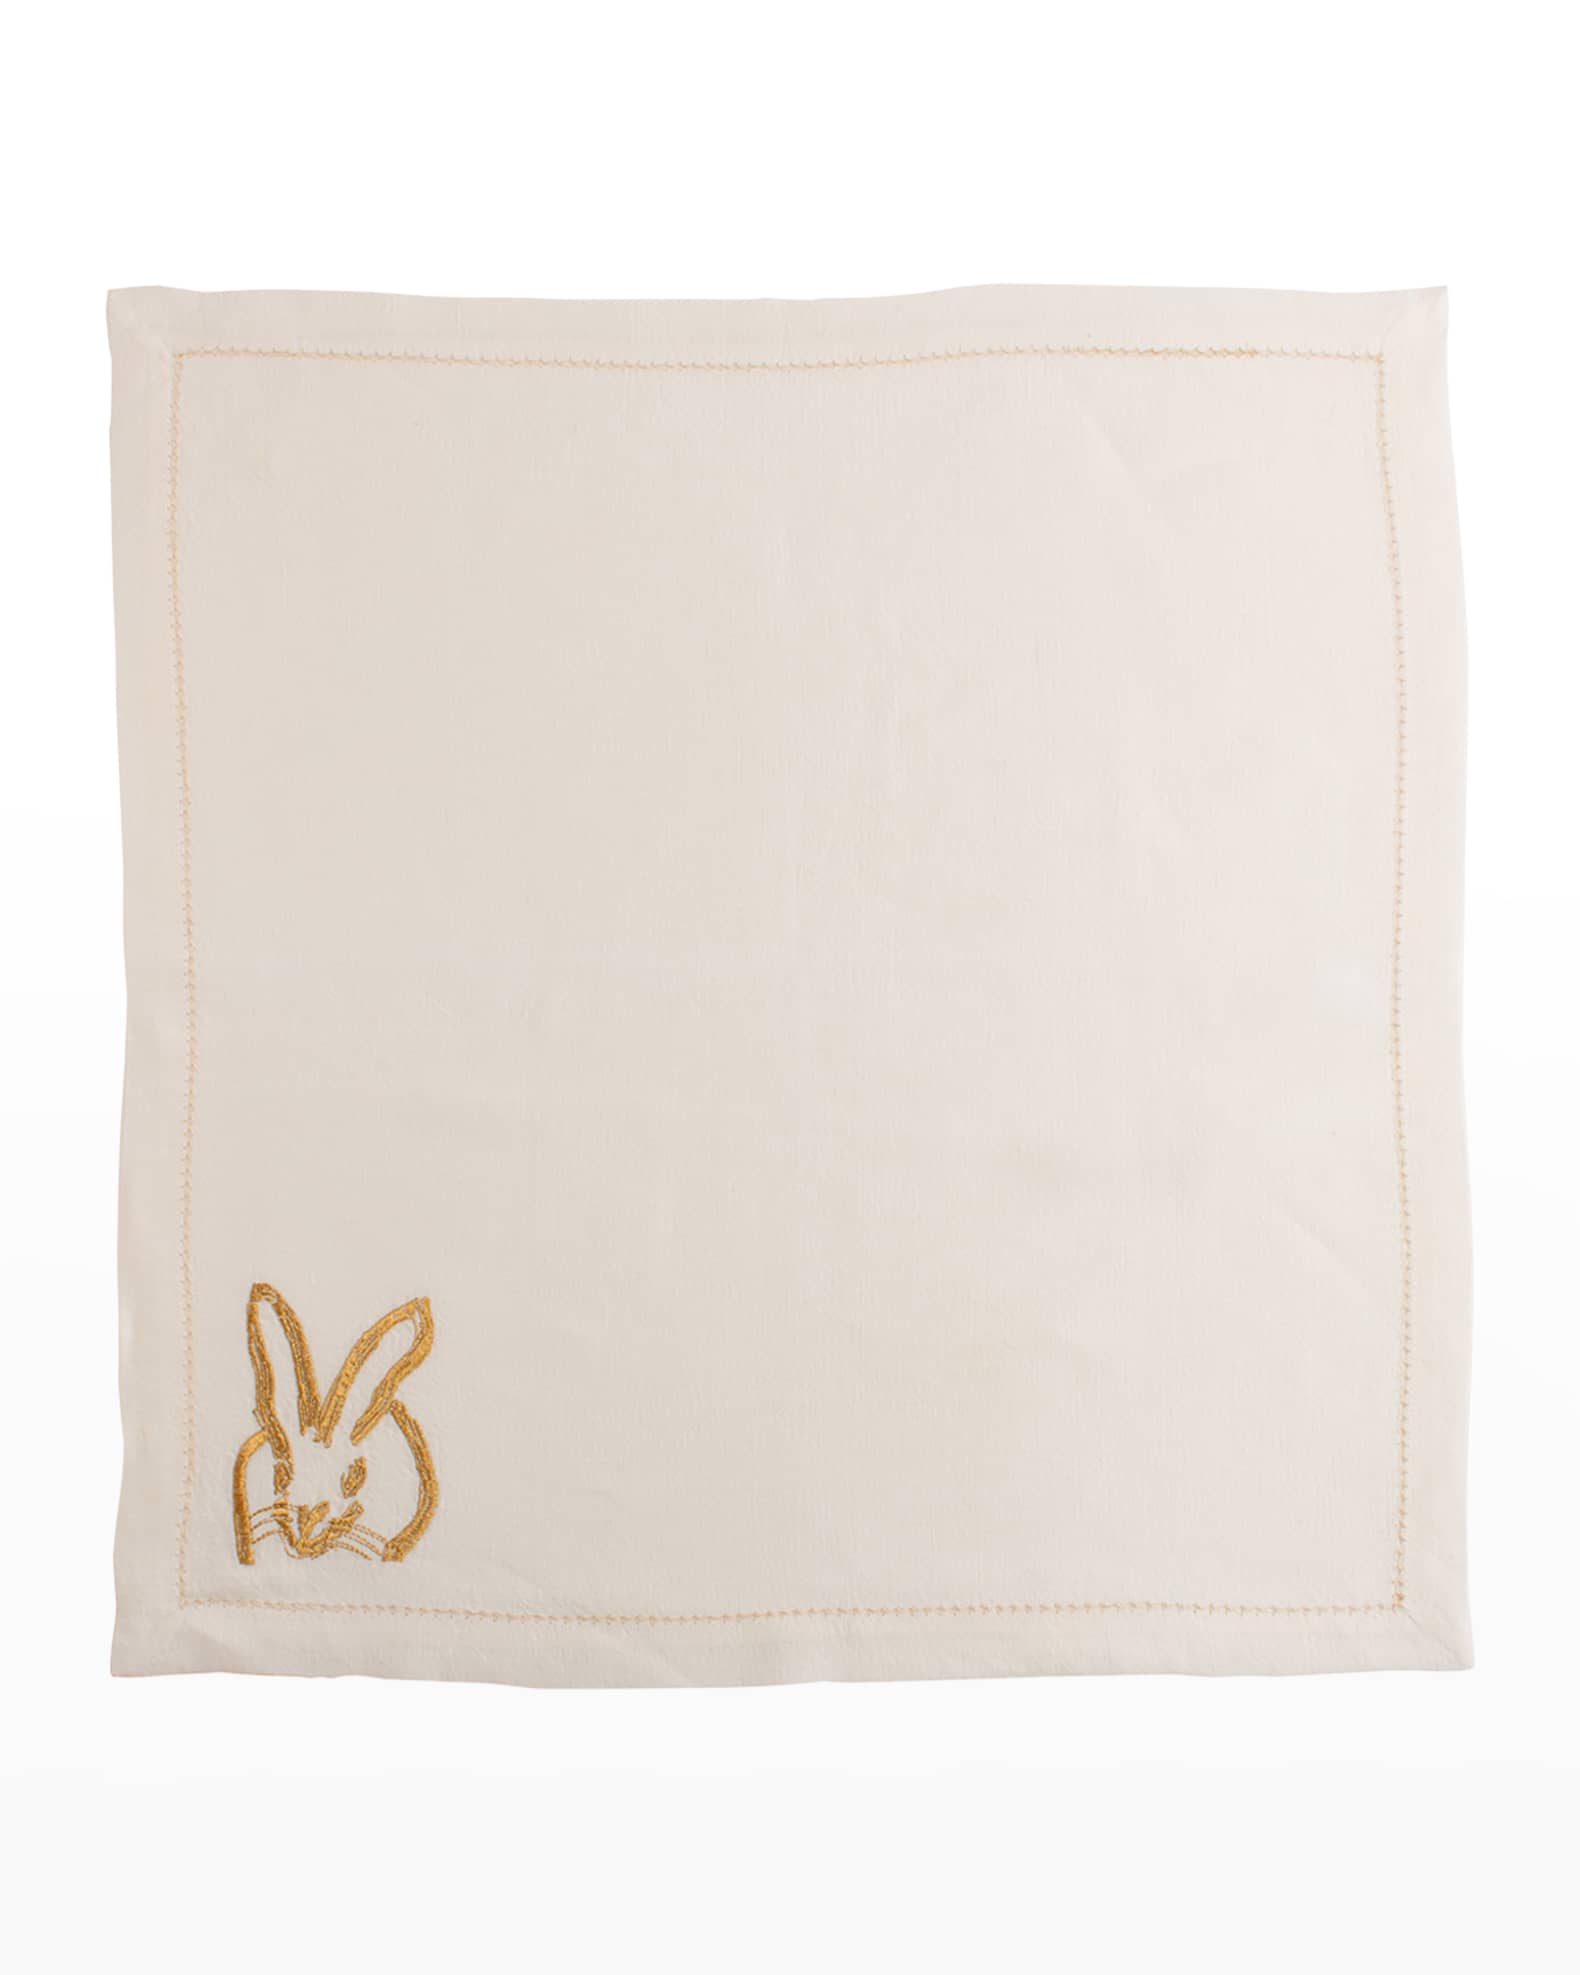 Painted Bunny Embroidered Linen Dinner Napkin, Red with Gold, Set of 2